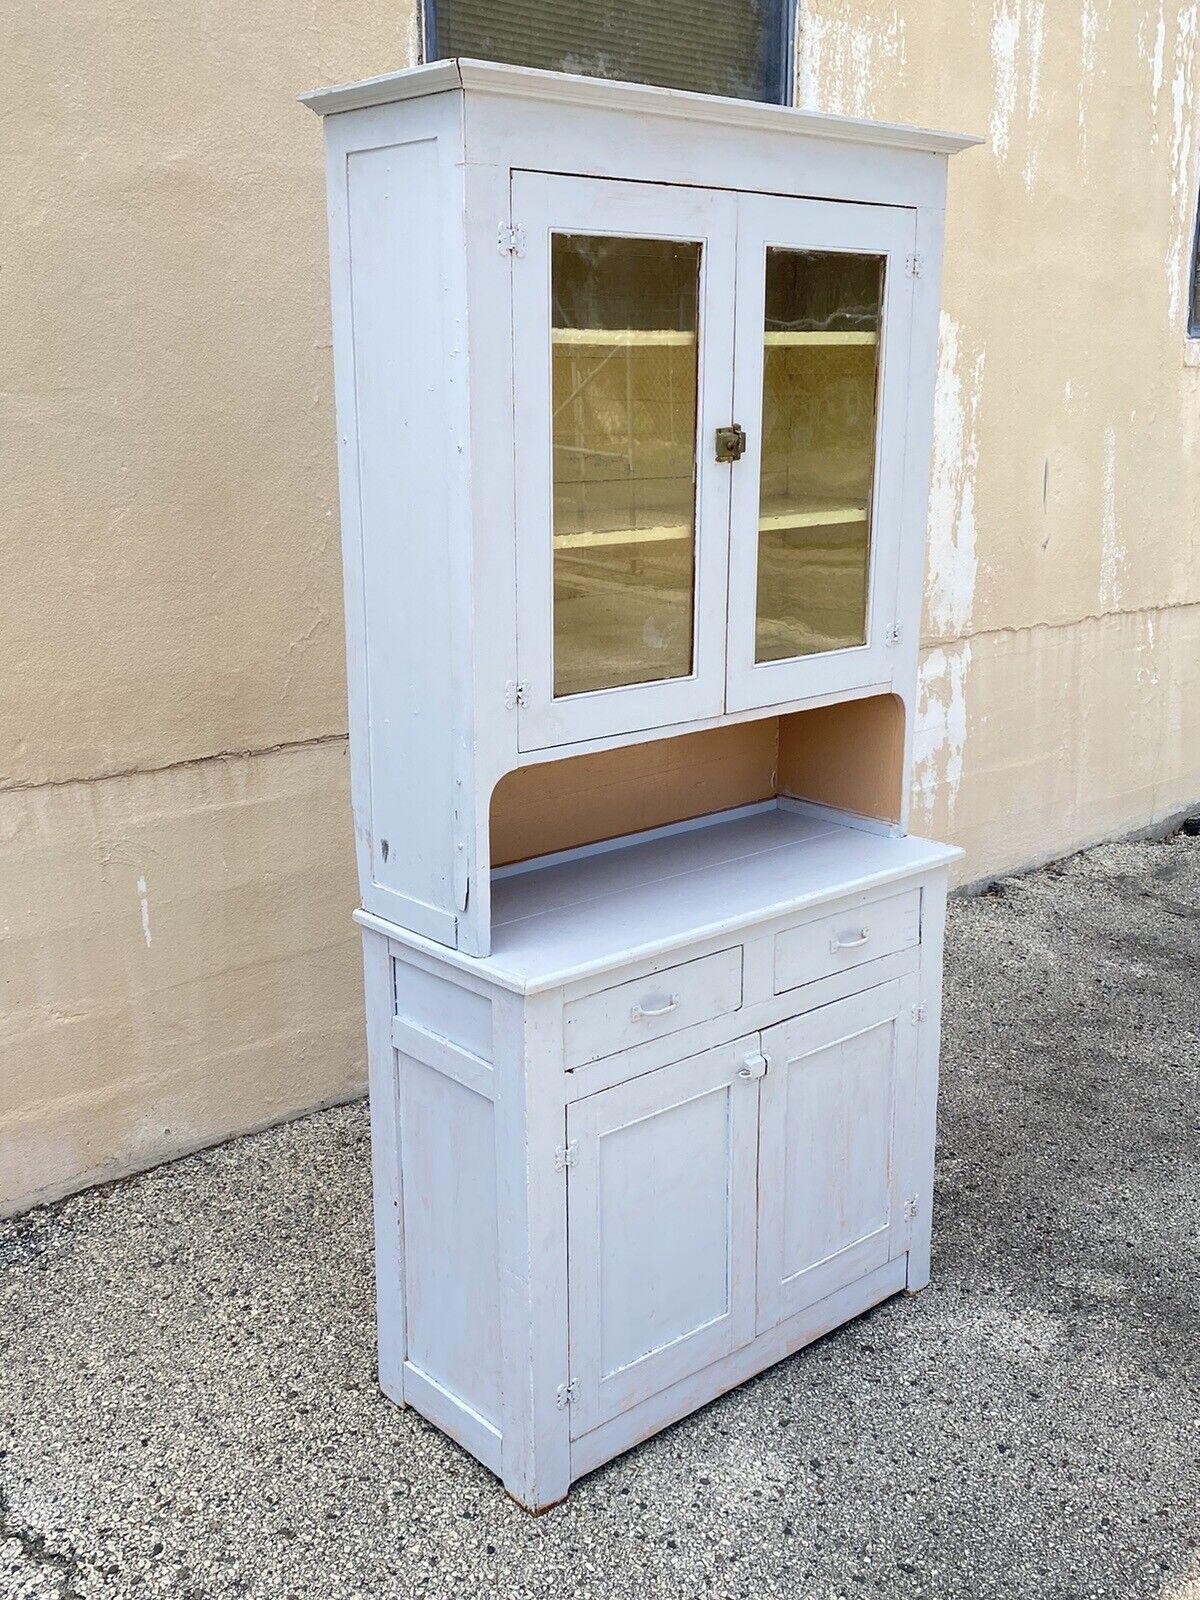 Antique Country Primitive White/Gray Painted 2 Piece Step Back Hutch Kitchen Cupboard. Item features 2 part construction, glass upper doors, 2 drawers, 2 lower cabinet doors, distress painted white/gray finish with peach colored tint, distress